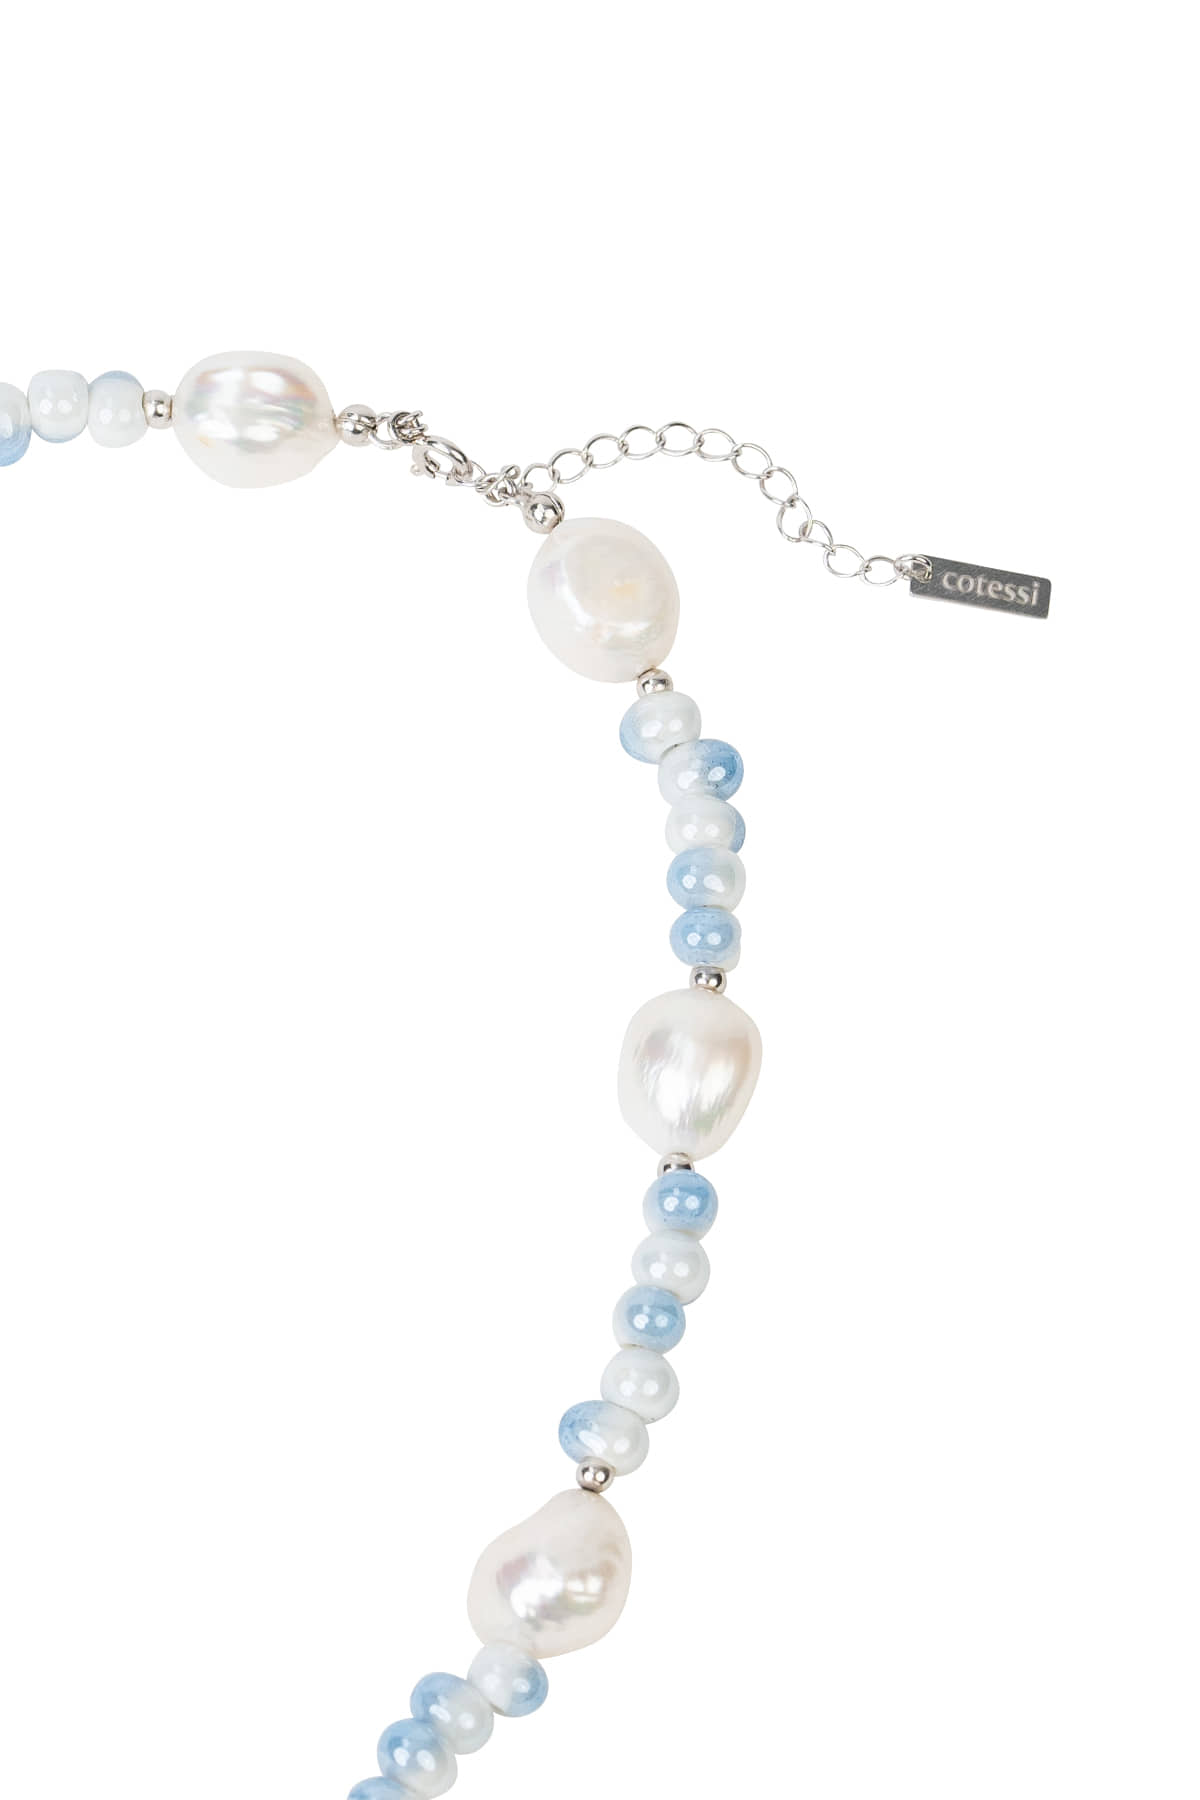 LARGE PEARL CERAMIC NECKLACE